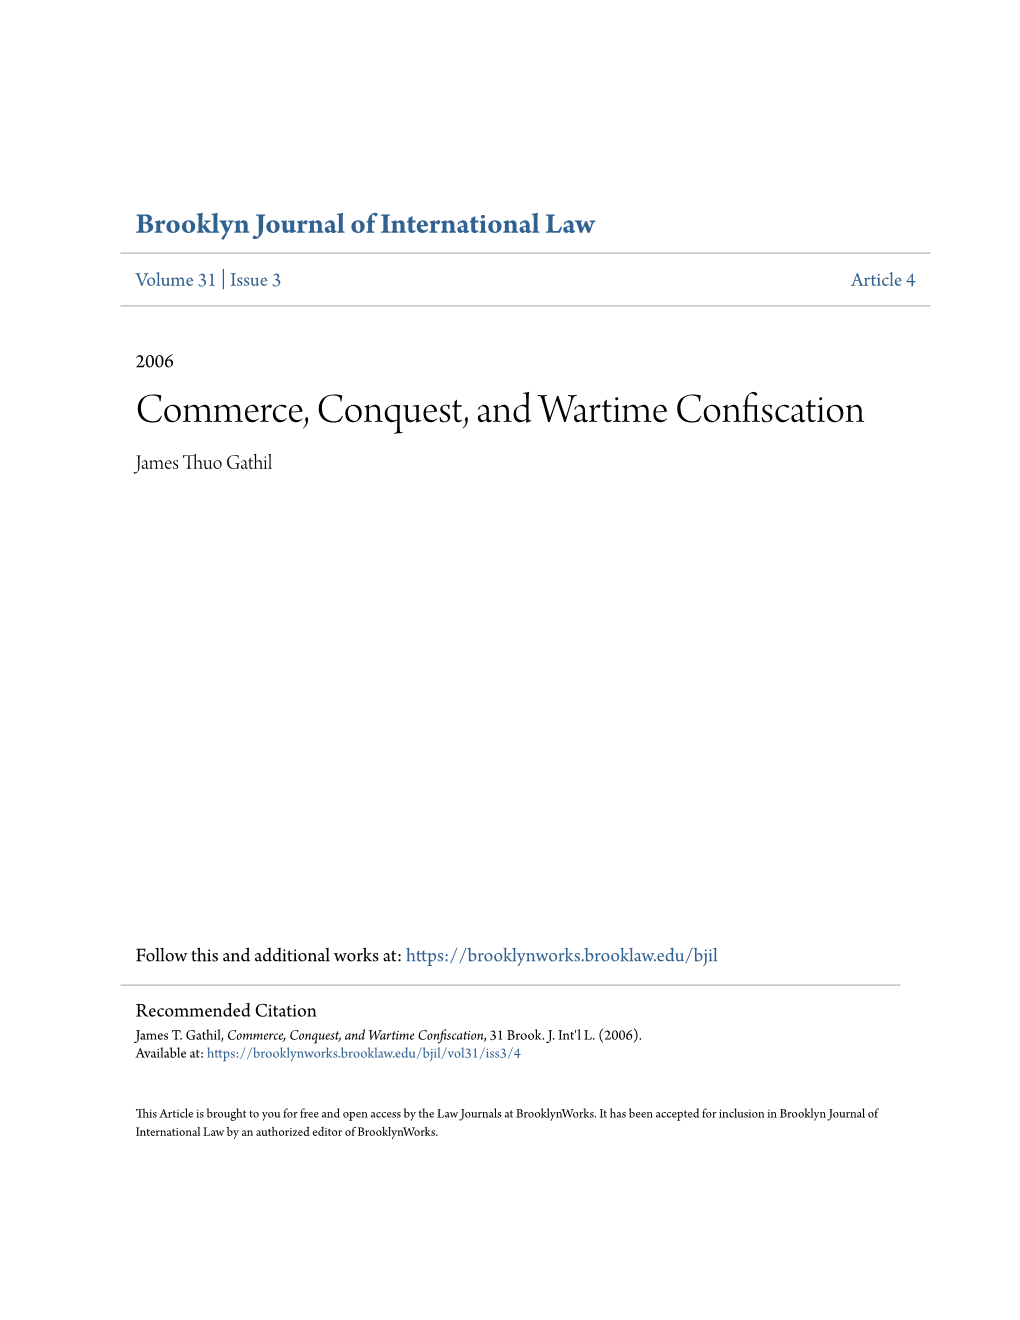 Commerce, Conquest, and Wartime Confiscation James Thuo Gathil